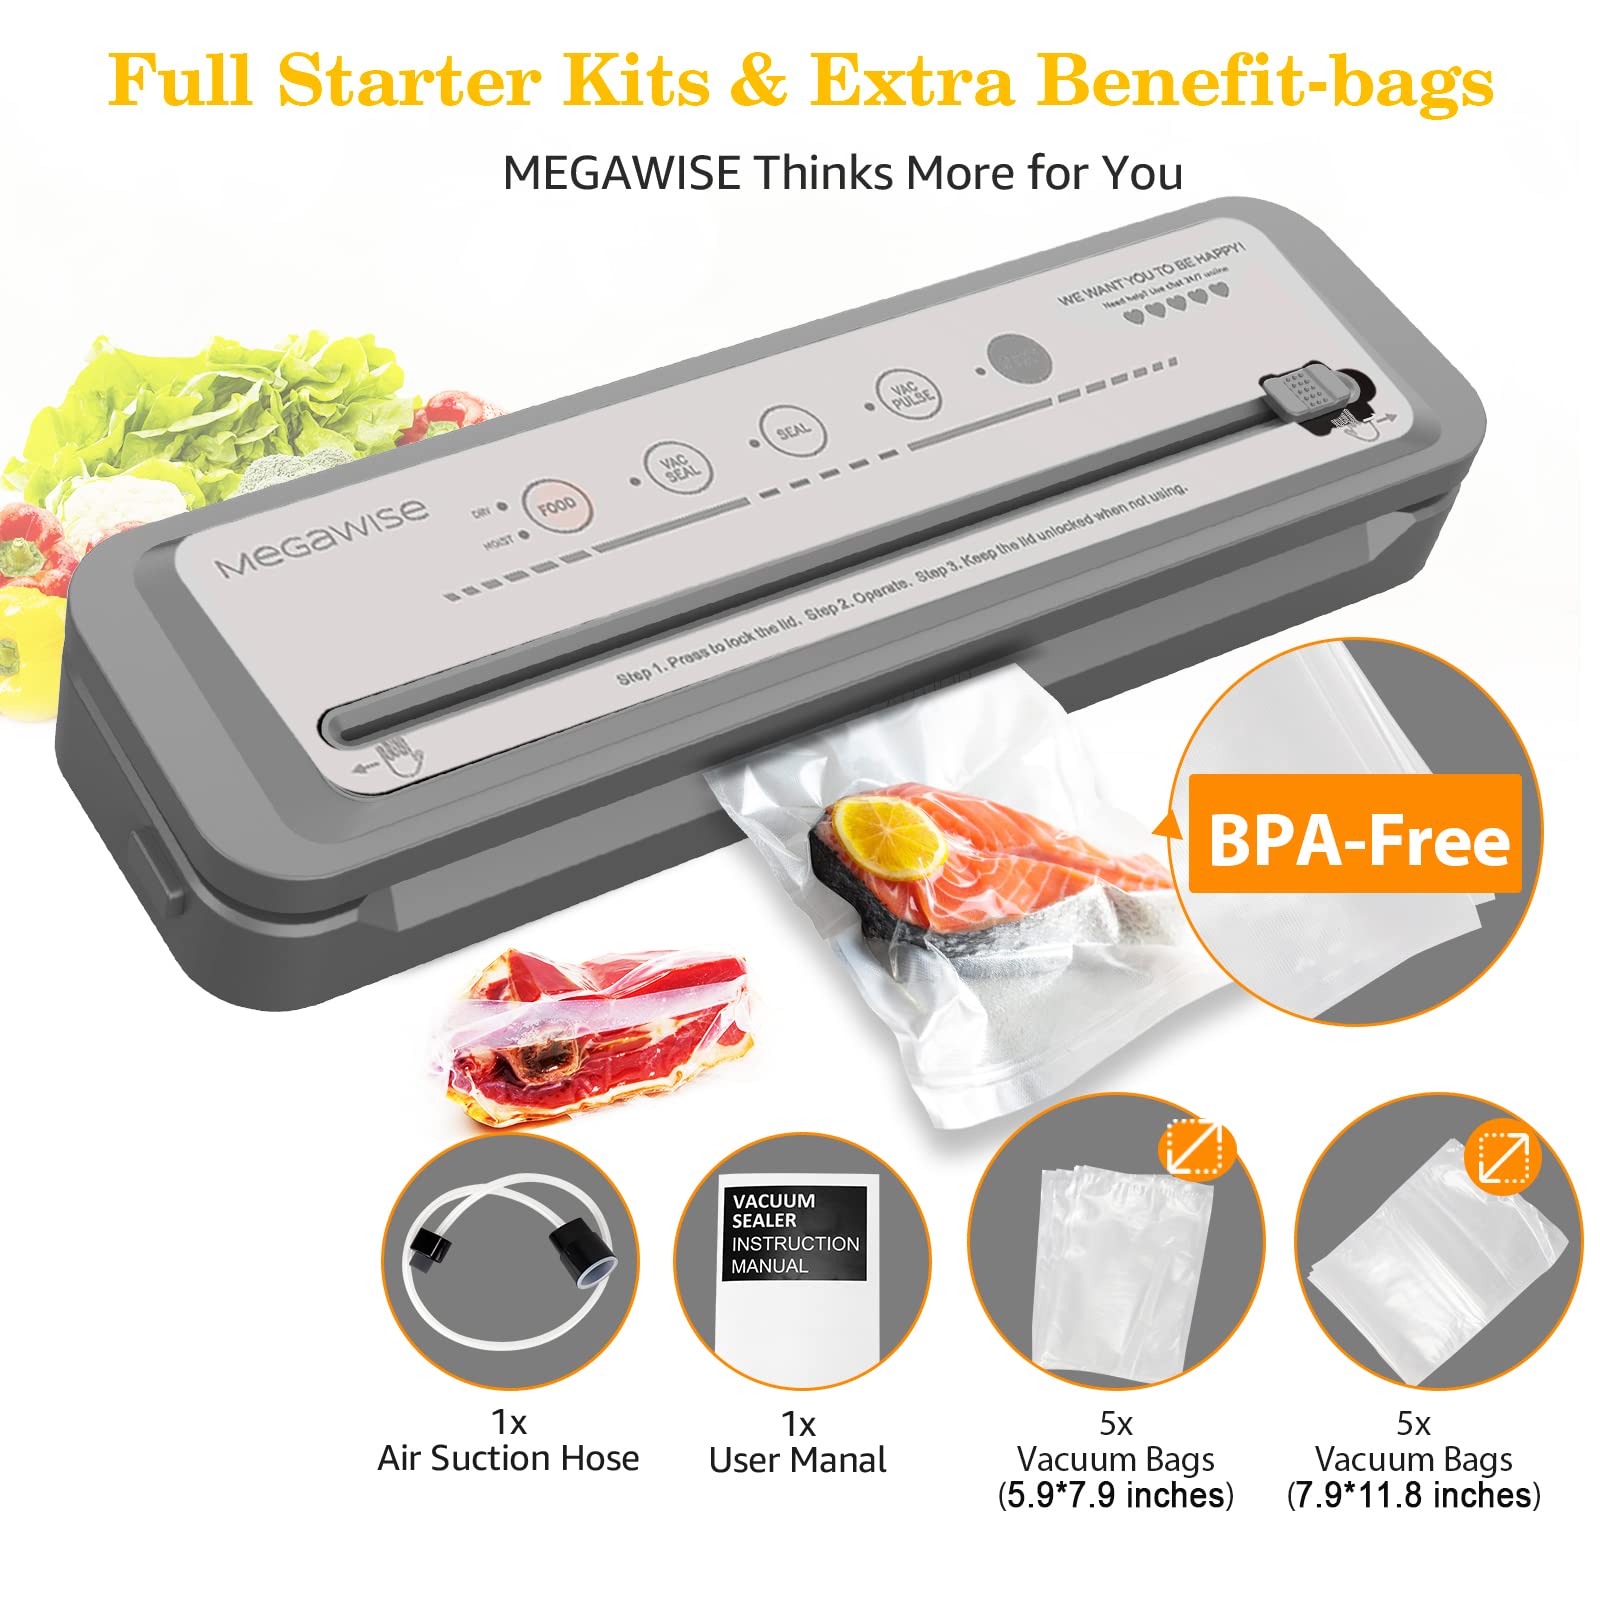 MegaWise Powerful and Compact Vacuum Sealer Machine (Silver Grey)